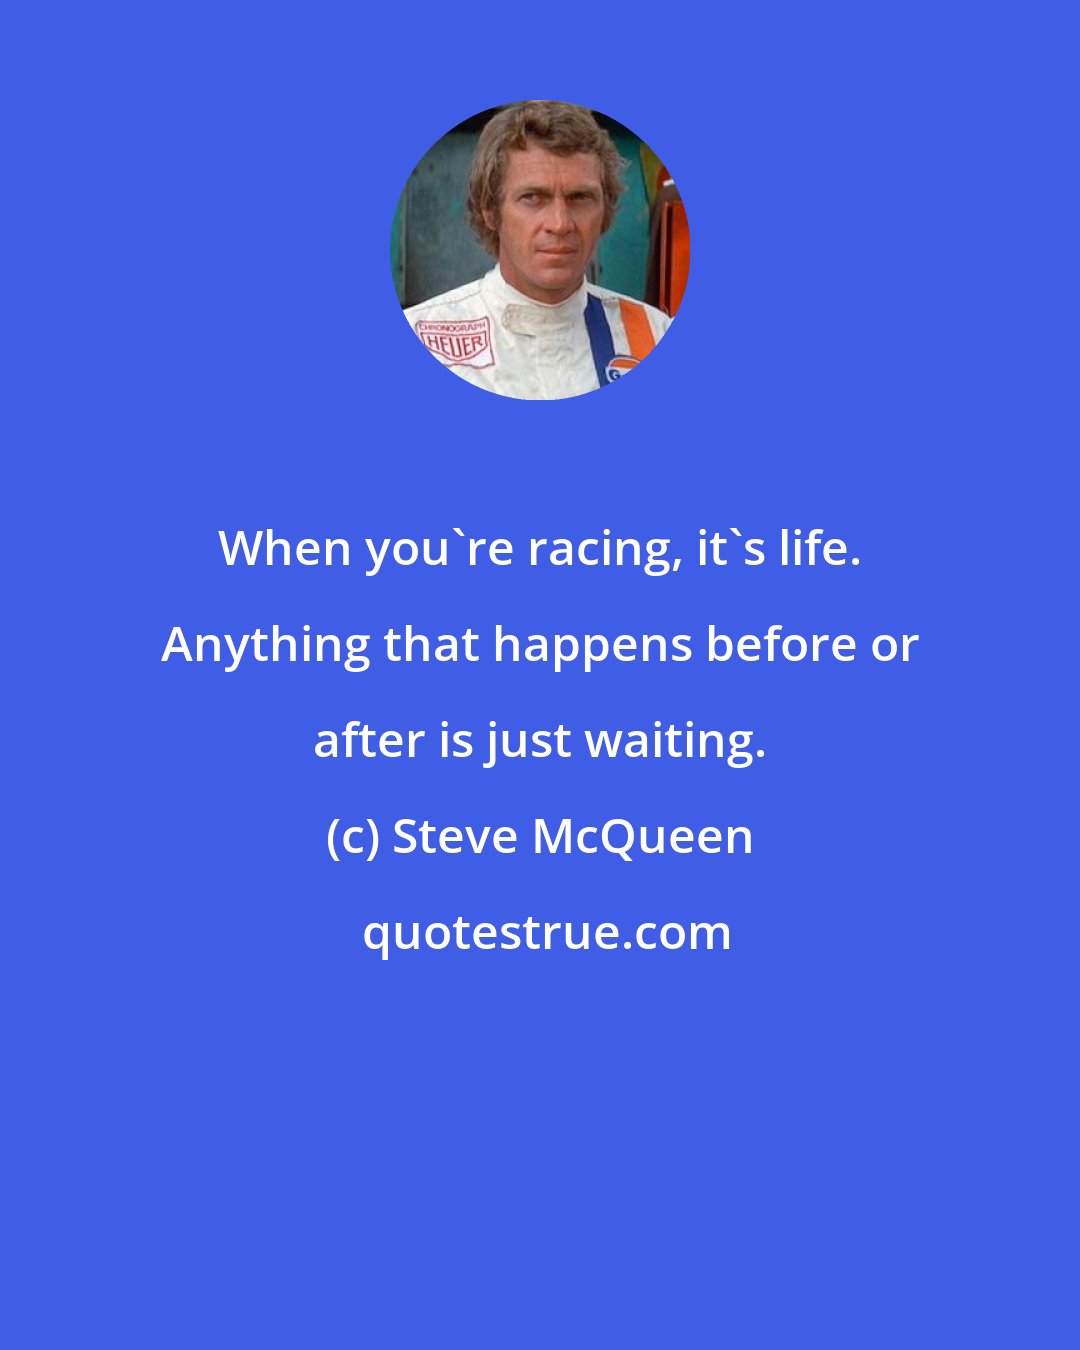 Steve McQueen: When you're racing, it's life. Anything that happens before or after is just waiting.